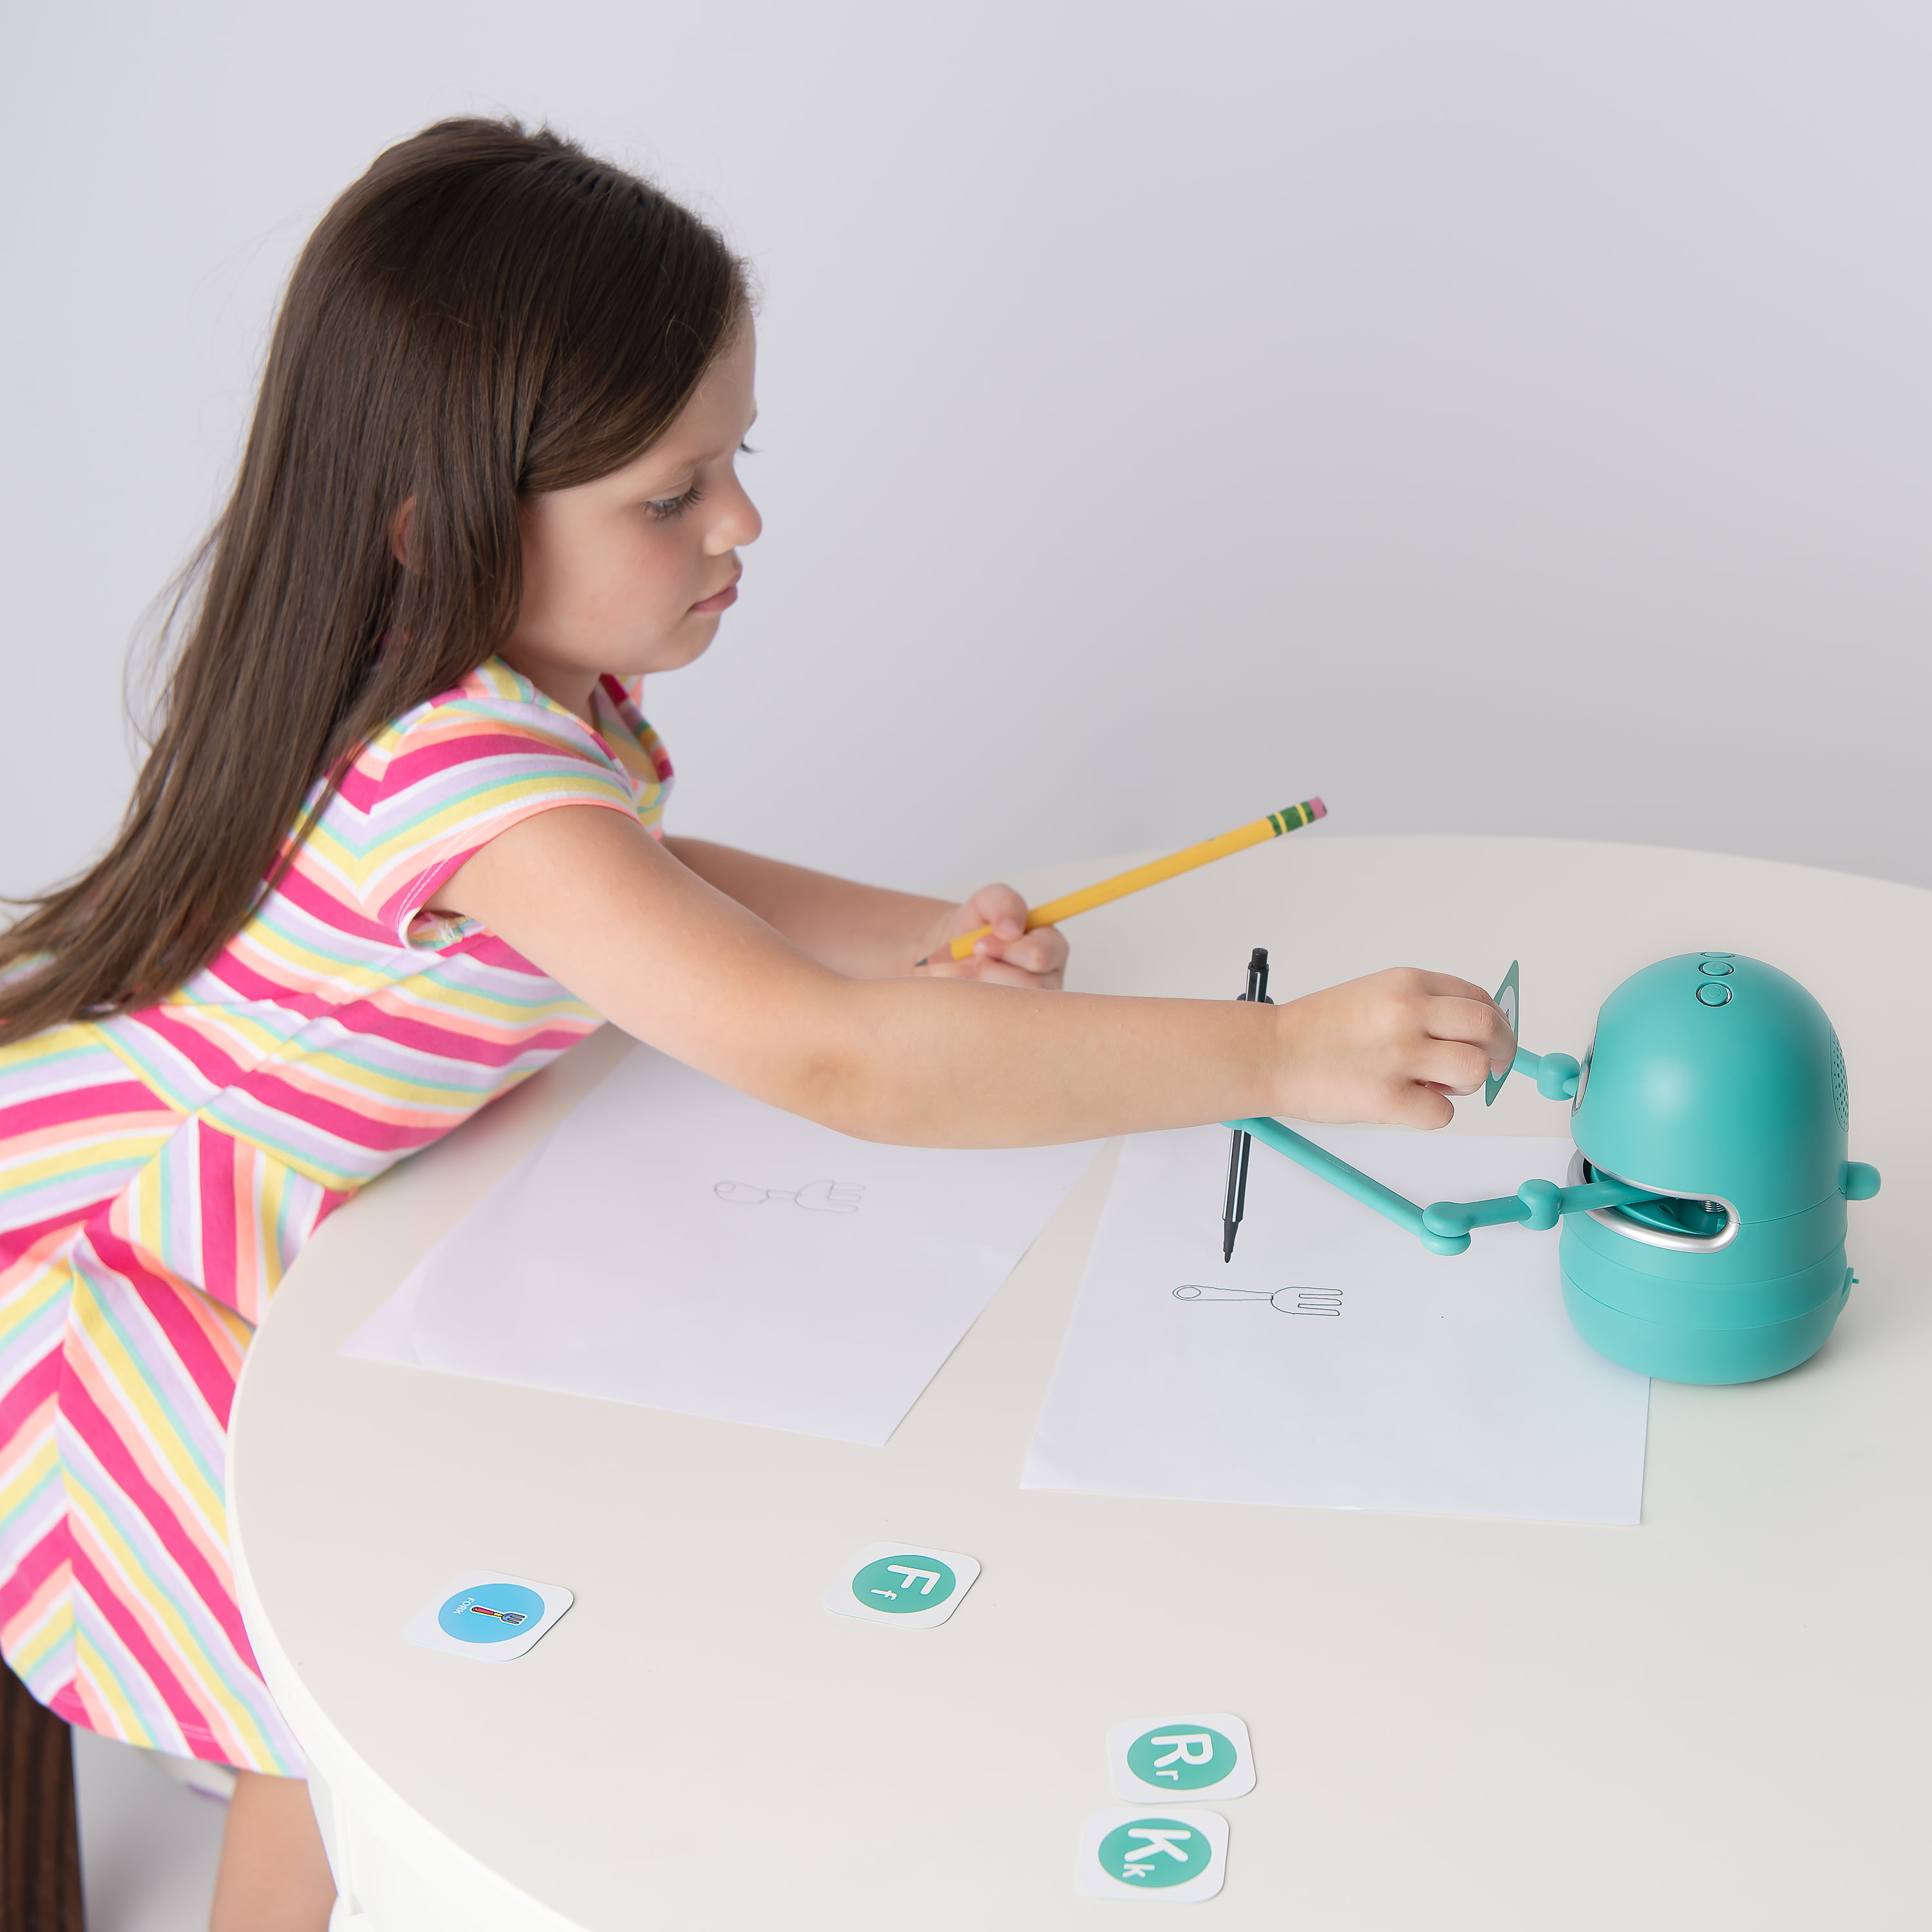 MindWare Quincy Deluxe Robot Teaches Children to Write and Draw - Ages 4+